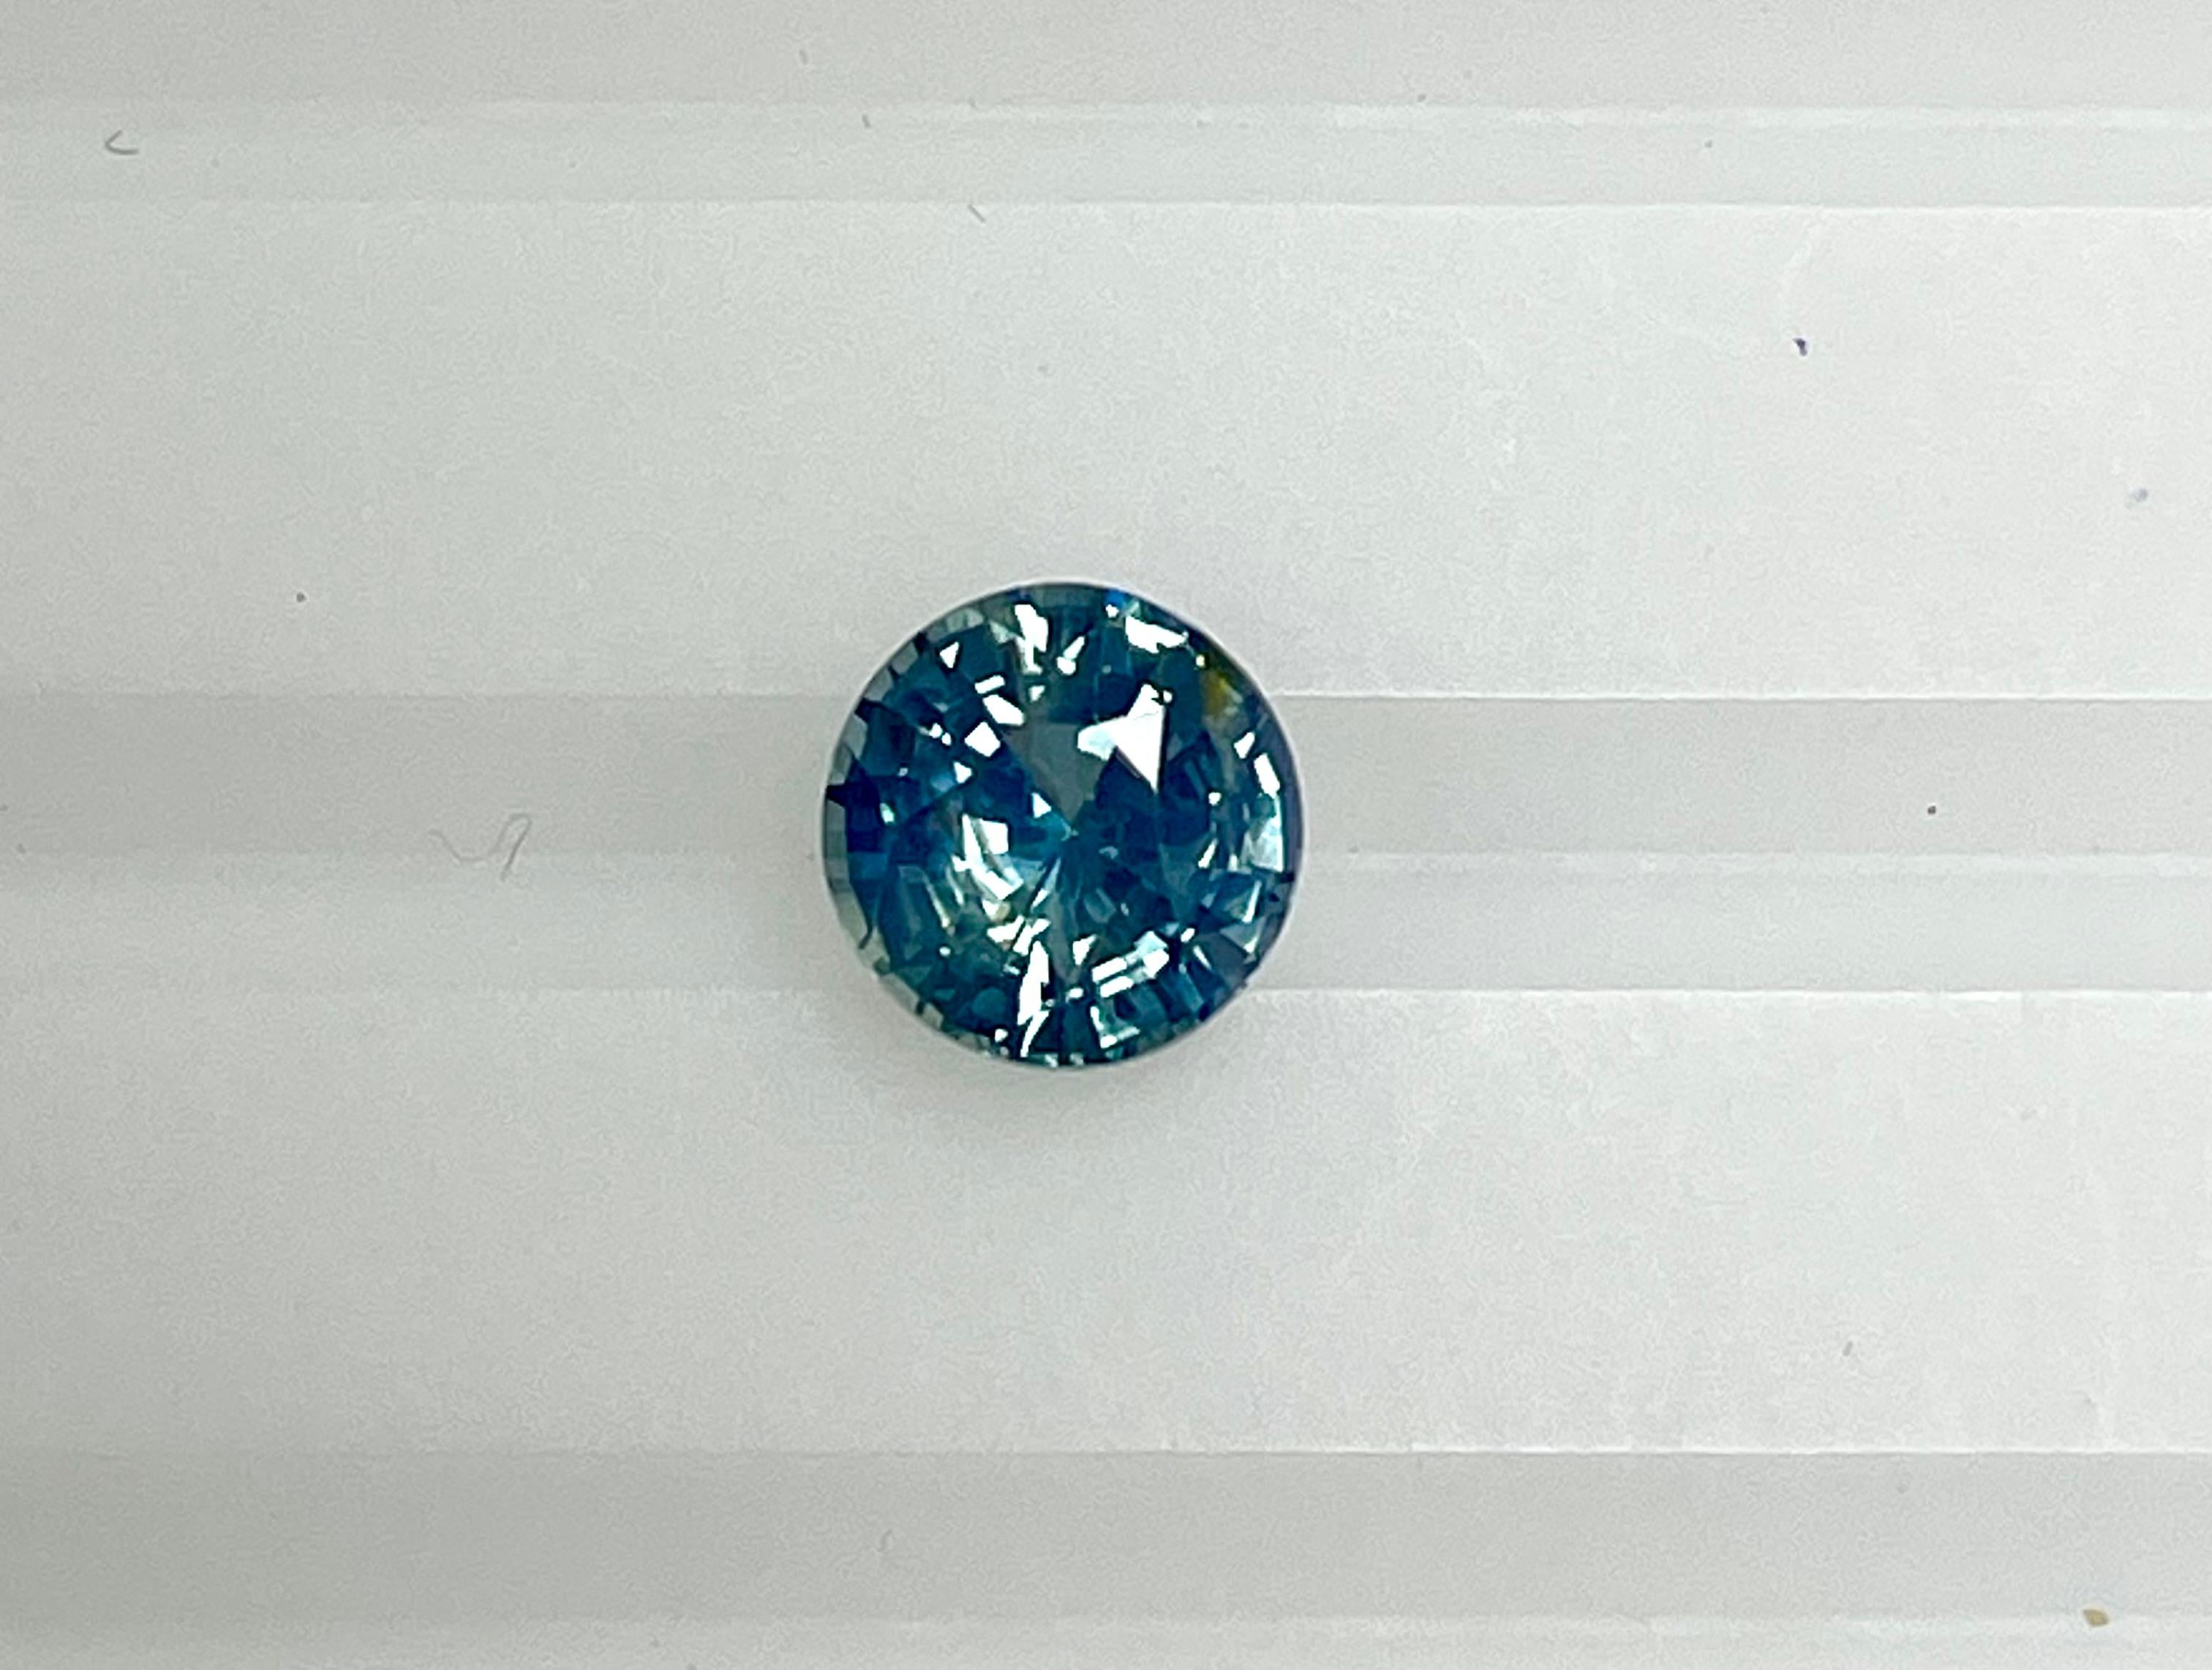 This is 2.59 Ct Natural No Heat Blueish green sapphire that is certified by GiA .
It is great mix of blue and green colors that they refer to as Teal color Sapphire.
It exhibits great color and clarity and cutting . It is African origin .